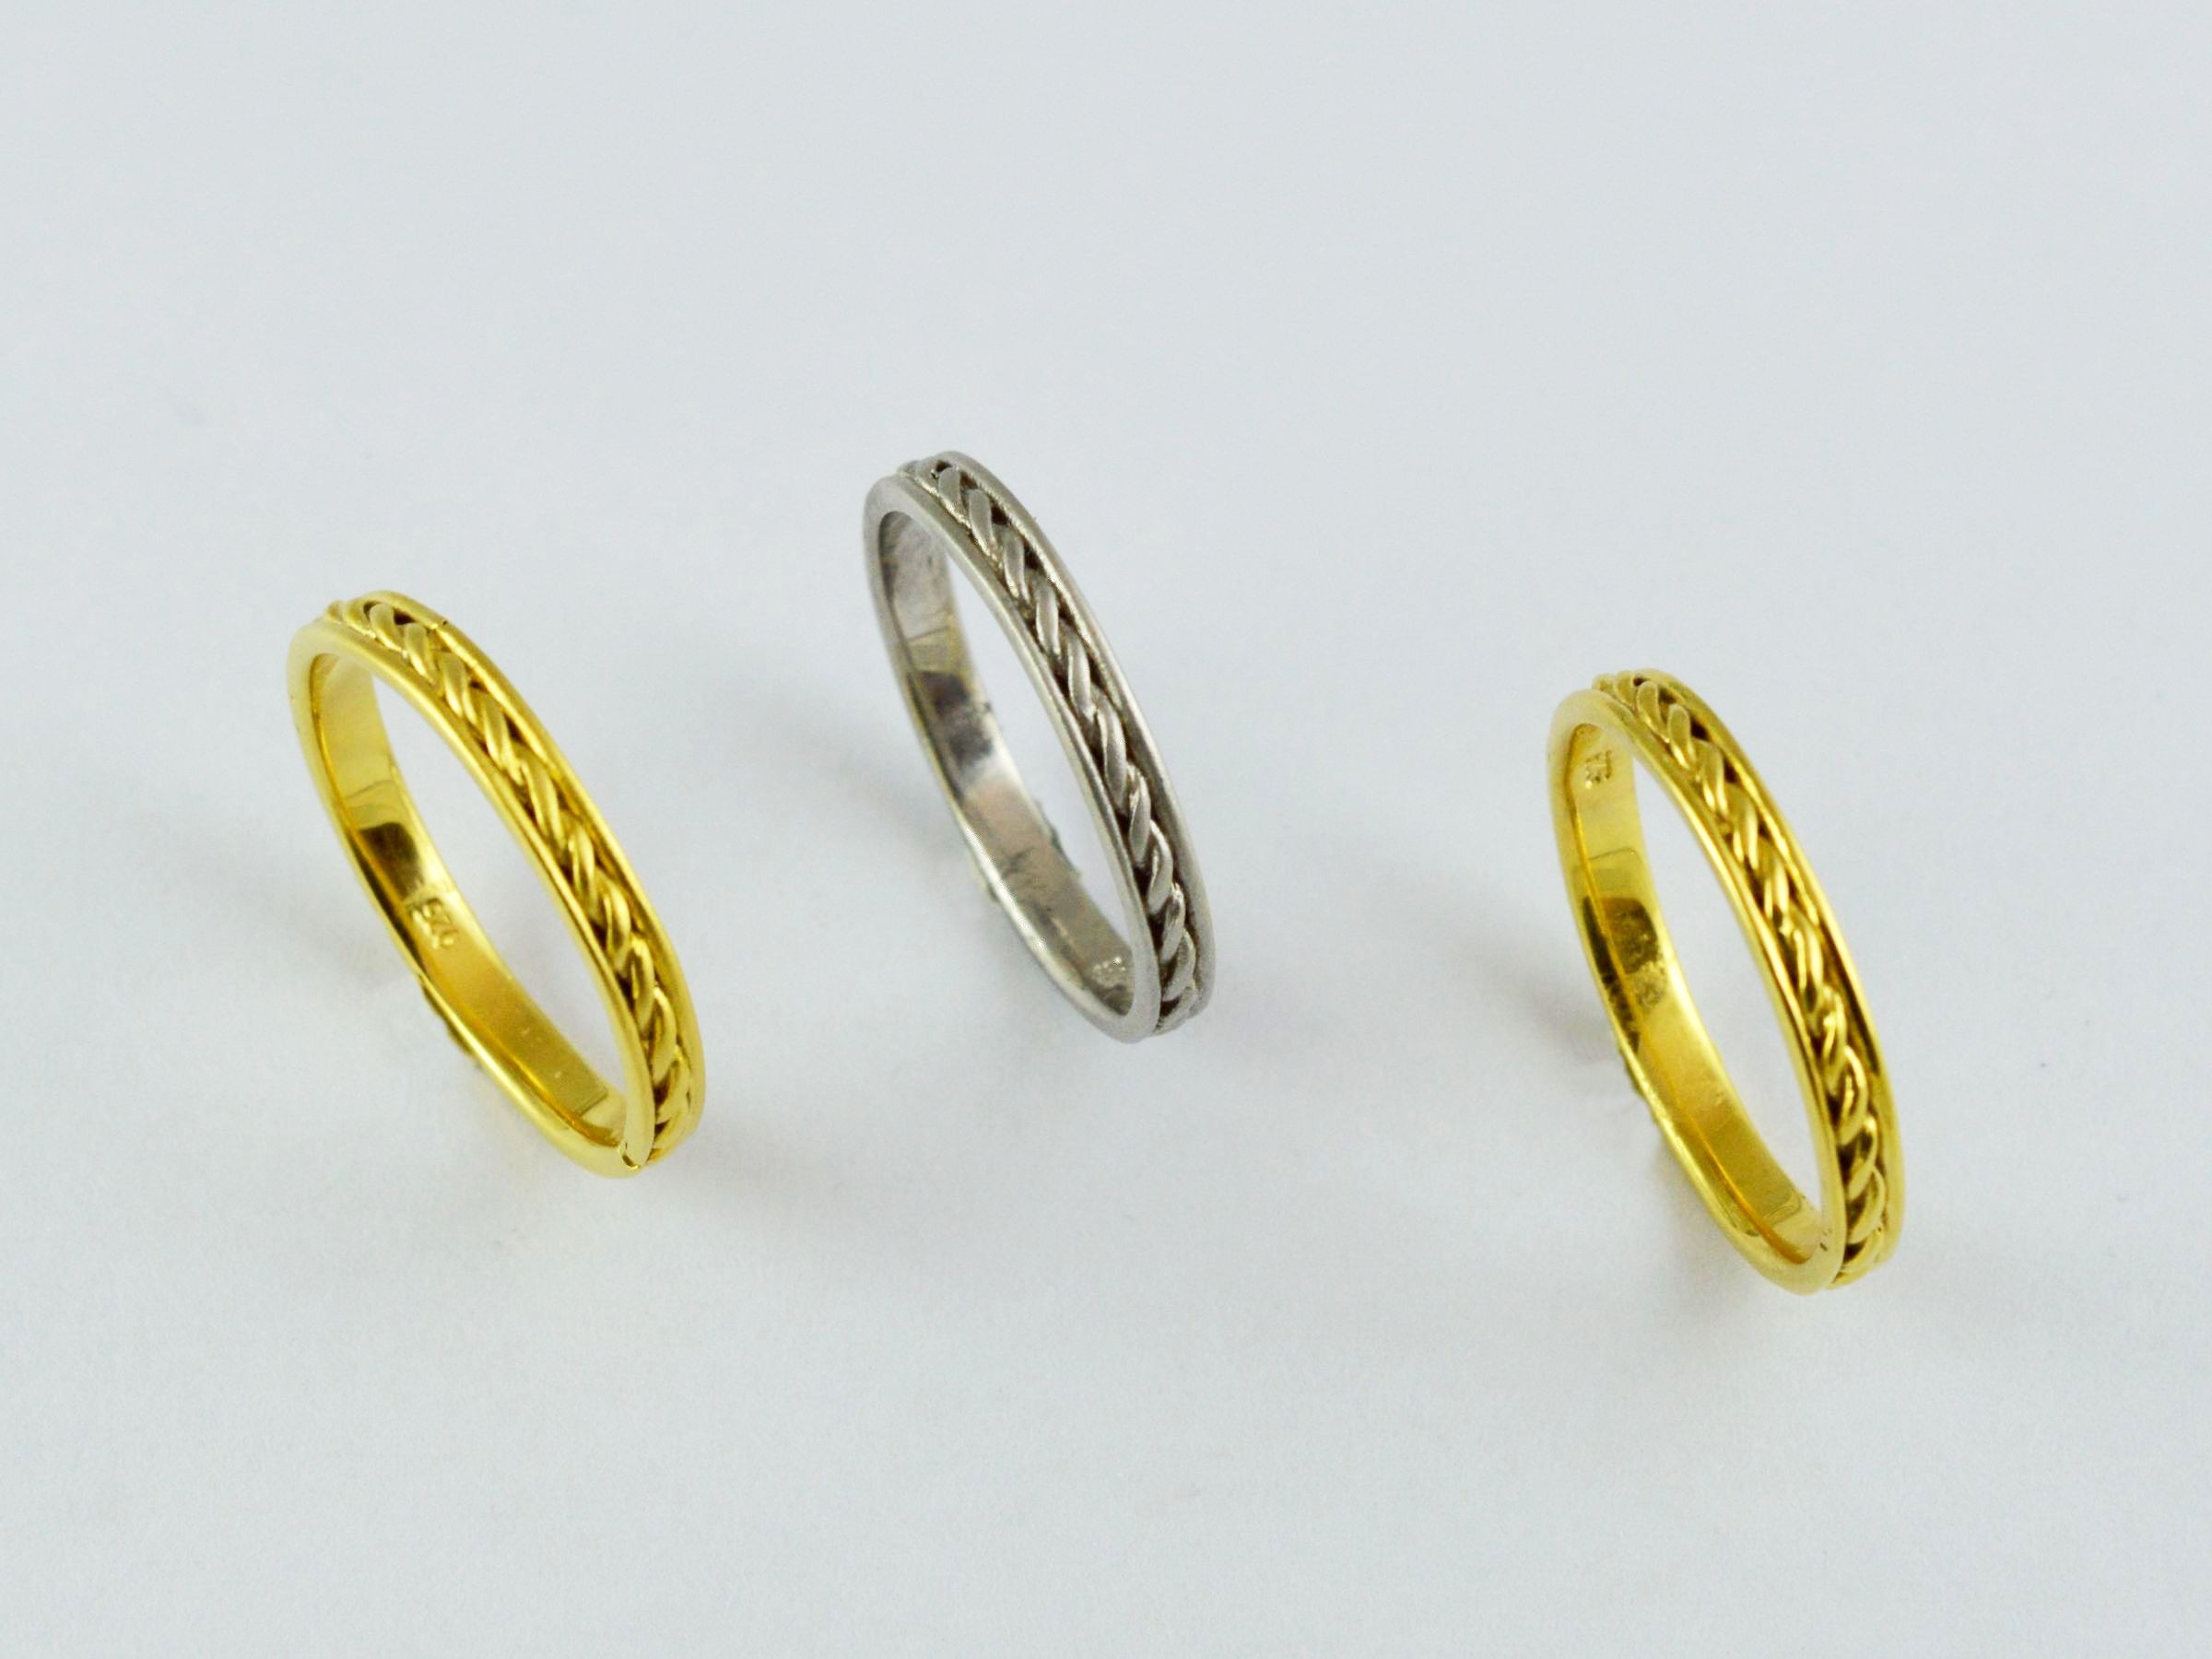 Wedding rings handmade gold or white gold in 18 or 14 carats